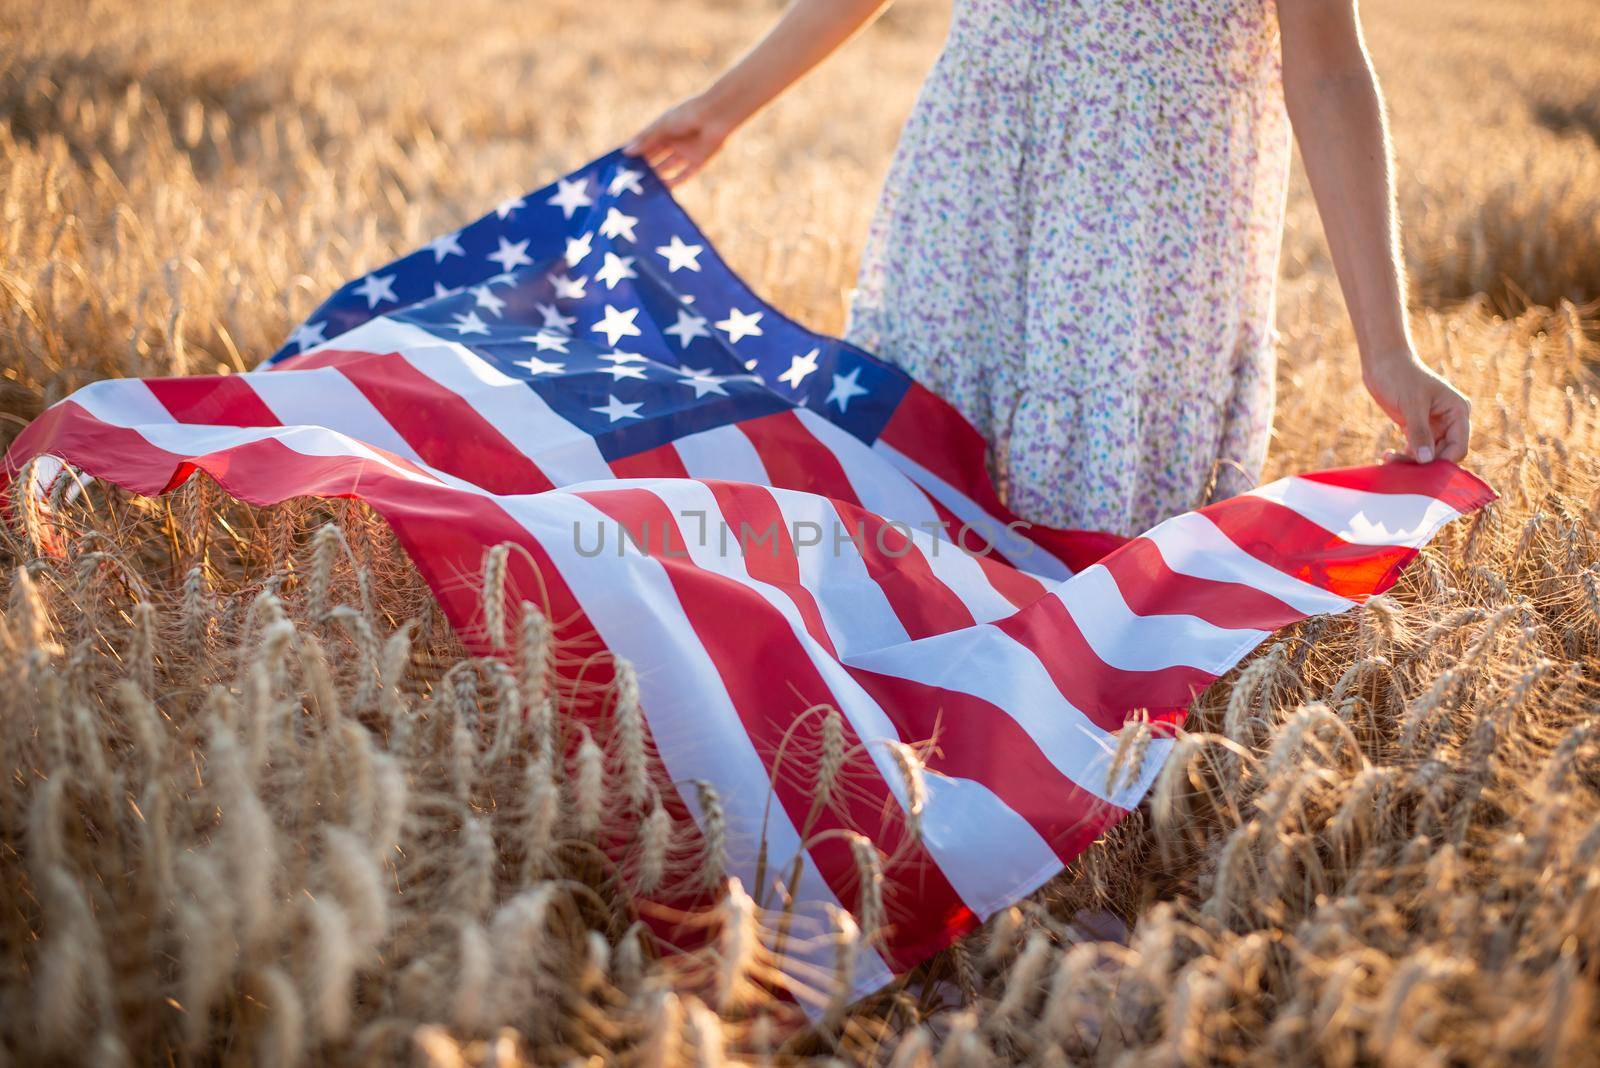 Close-up photo of girl holding flag of USA on ripe rye or wheat